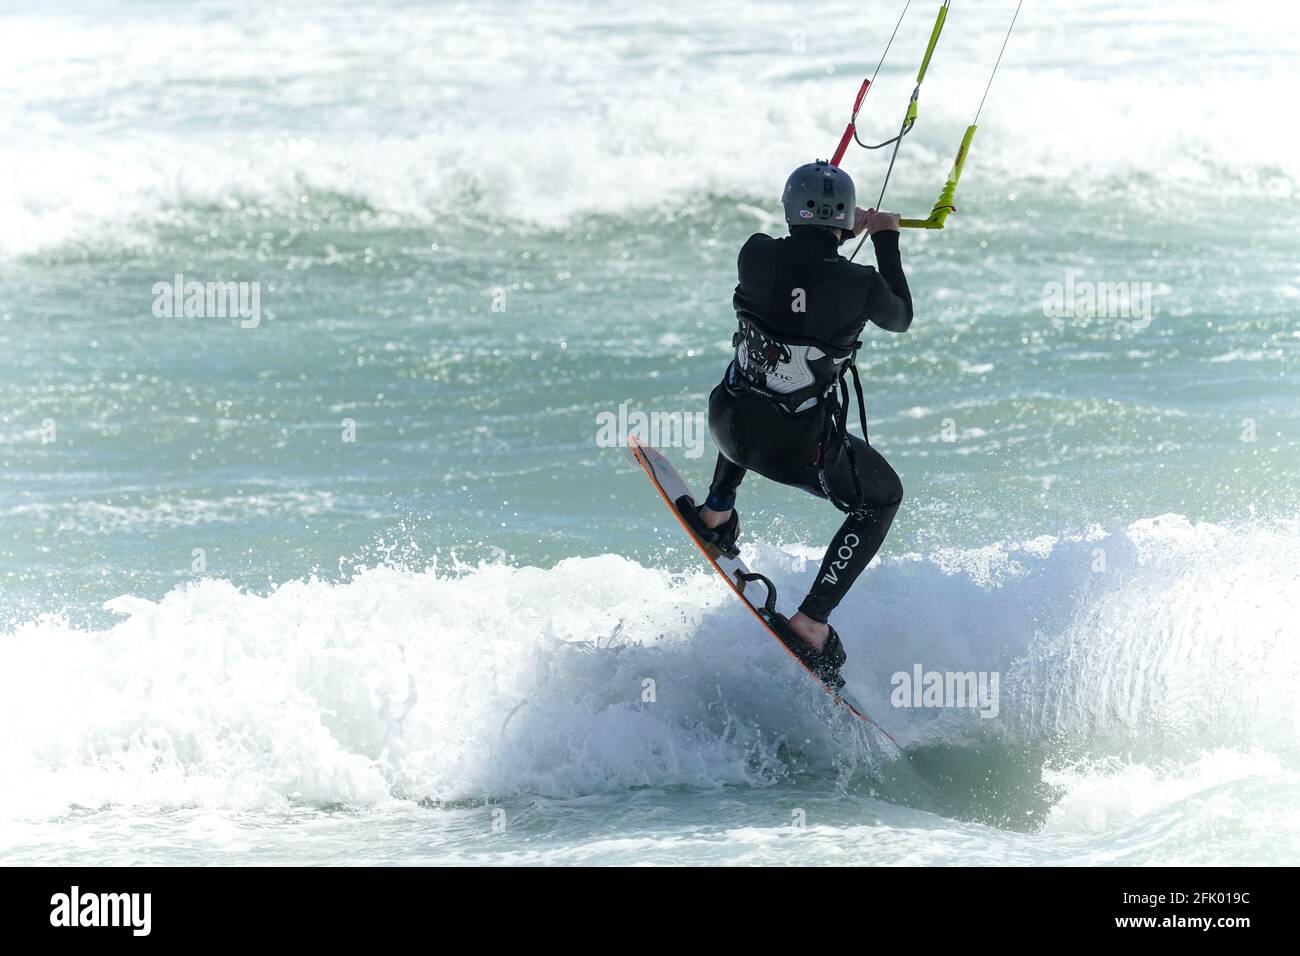 kite surfer or kite boarder holds onto a harness and jumps a wave on the ocean Stock Photo